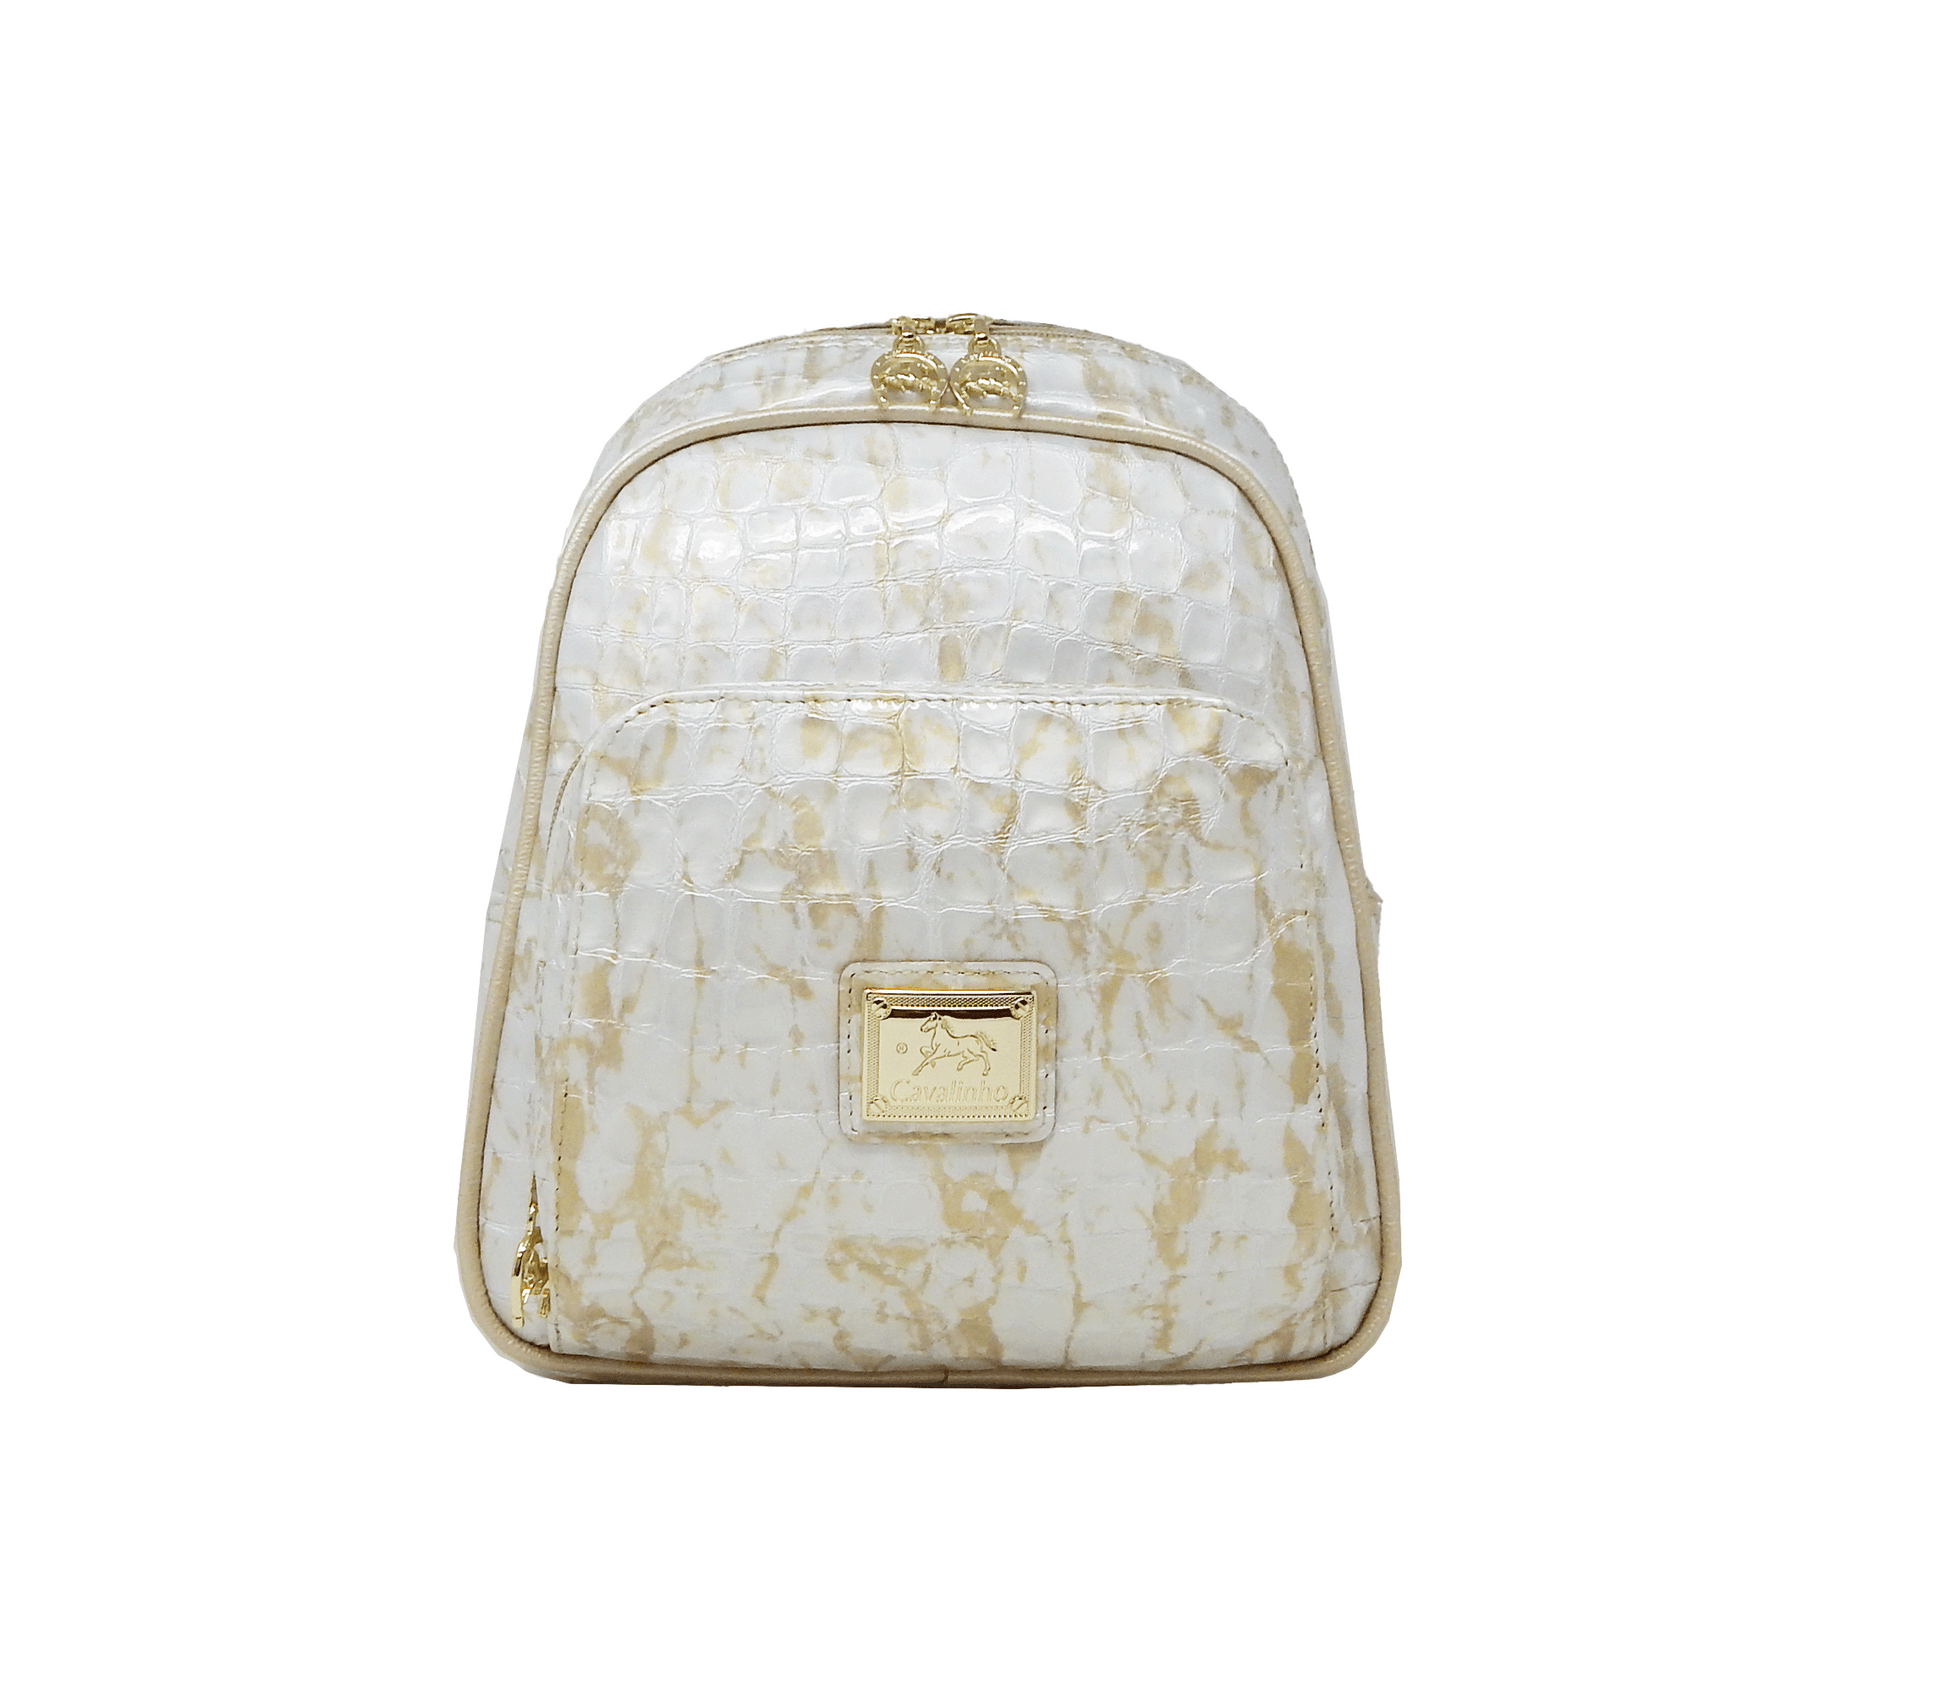 #color_ Beige White | Cavalinho Gallop Patent Leather Backpack - Beige White - 18170525.31_1